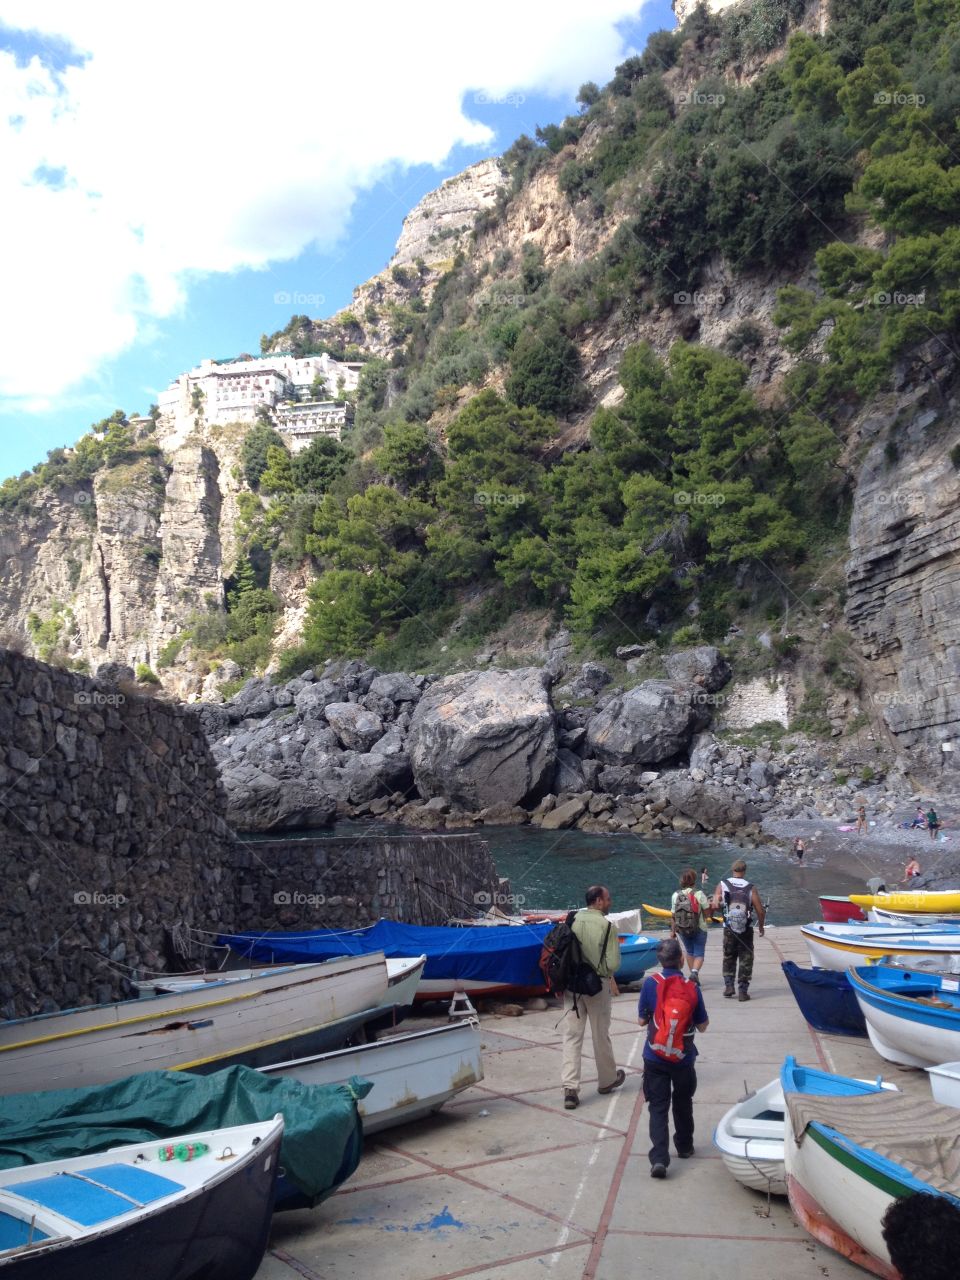 Reaching the Beach of Praiano. From Sentiero degli Dei, the Path of the Gods, you can reach different beaches of the Sorrento Coast. This one is the be